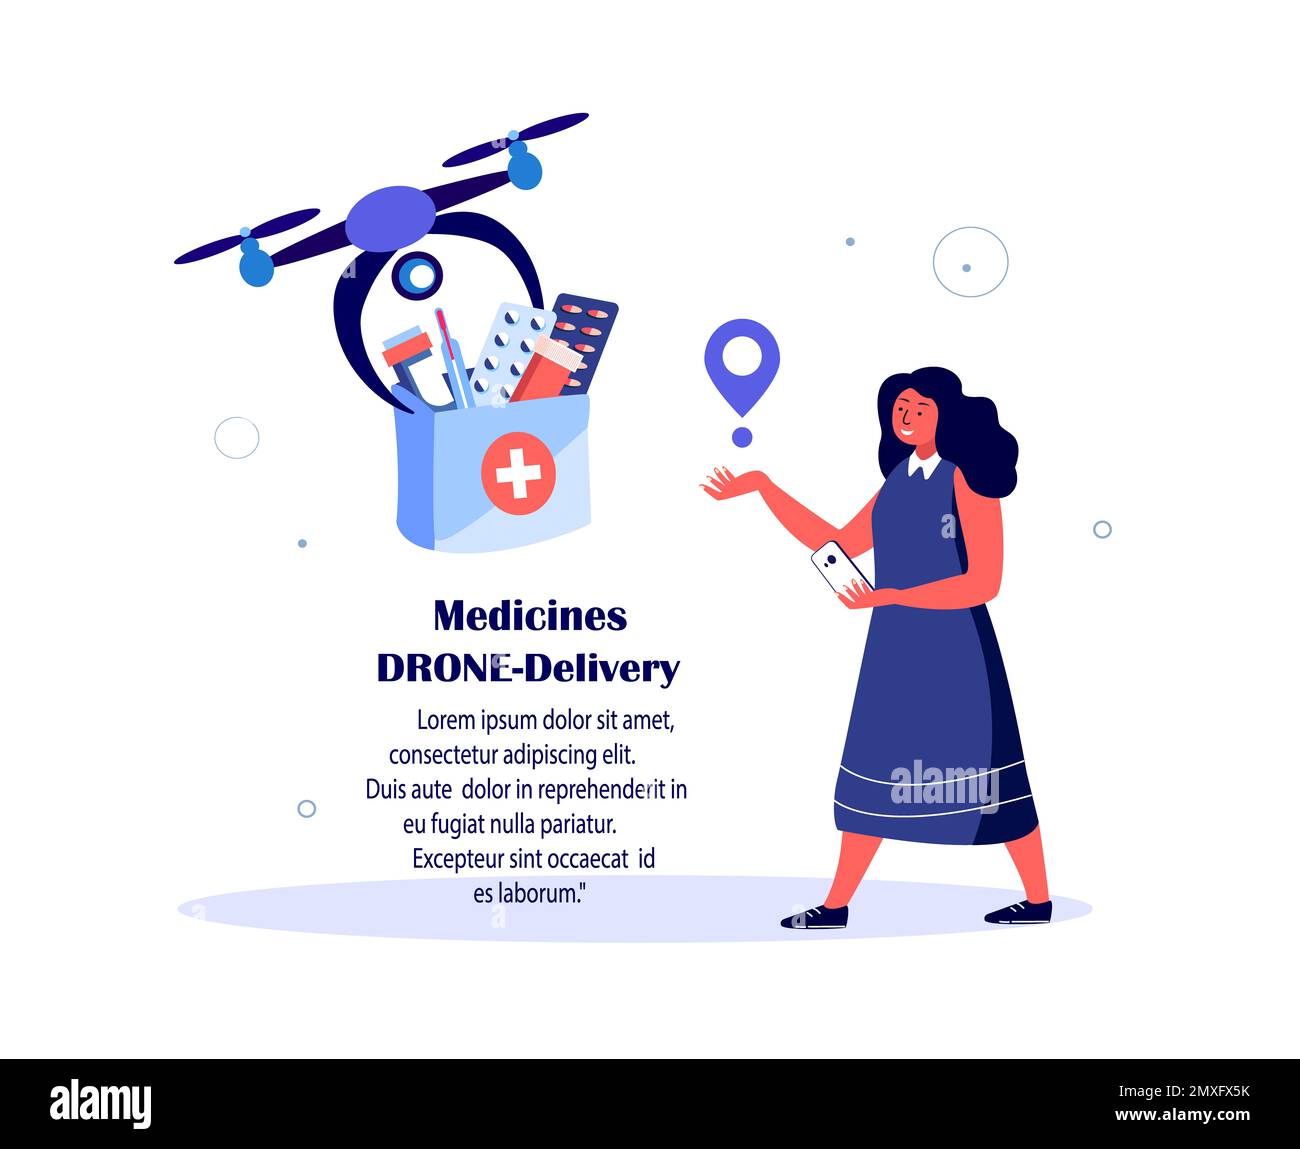 Drone Delivery.Woman Receive Contactless Delivery Parcel.First Aid Kit,Remotely Piloted Flying Aircraft.Medicament,Drug,Remedy.Consumption Online. Hom Stock Photo